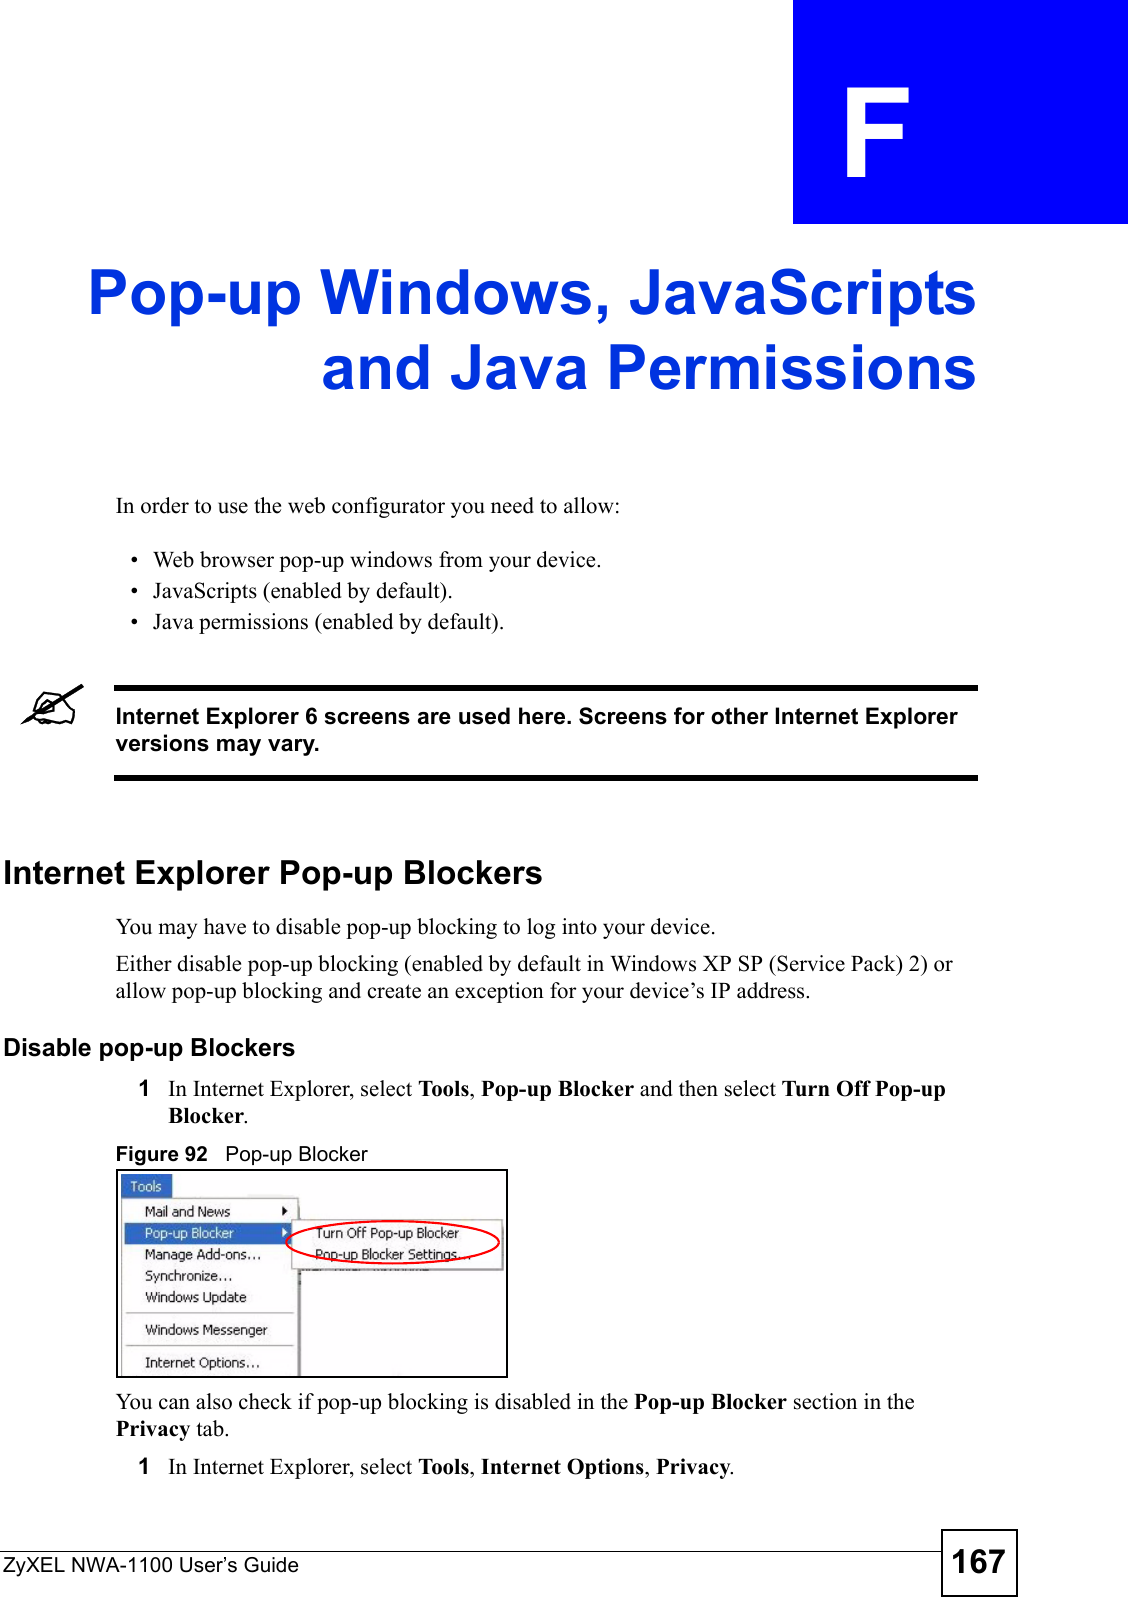 ZyXEL NWA-1100 User’s Guide 167APPENDIX  F Pop-up Windows, JavaScriptsand Java PermissionsIn order to use the web configurator you need to allow:• Web browser pop-up windows from your device.• JavaScripts (enabled by default).• Java permissions (enabled by default).&quot;Internet Explorer 6 screens are used here. Screens for other Internet Explorer versions may vary.Internet Explorer Pop-up BlockersYou may have to disable pop-up blocking to log into your device. Either disable pop-up blocking (enabled by default in Windows XP SP (Service Pack) 2) or allow pop-up blocking and create an exception for your device’s IP address.Disable pop-up Blockers1In Internet Explorer, select To ols , Pop-up Blocker and then select Turn Off Pop-up Blocker. Figure 92   Pop-up BlockerYou can also check if pop-up blocking is disabled in the Pop-up Blocker section in the Privacy tab. 1In Internet Explorer, select To ols , Internet Options, Privacy.